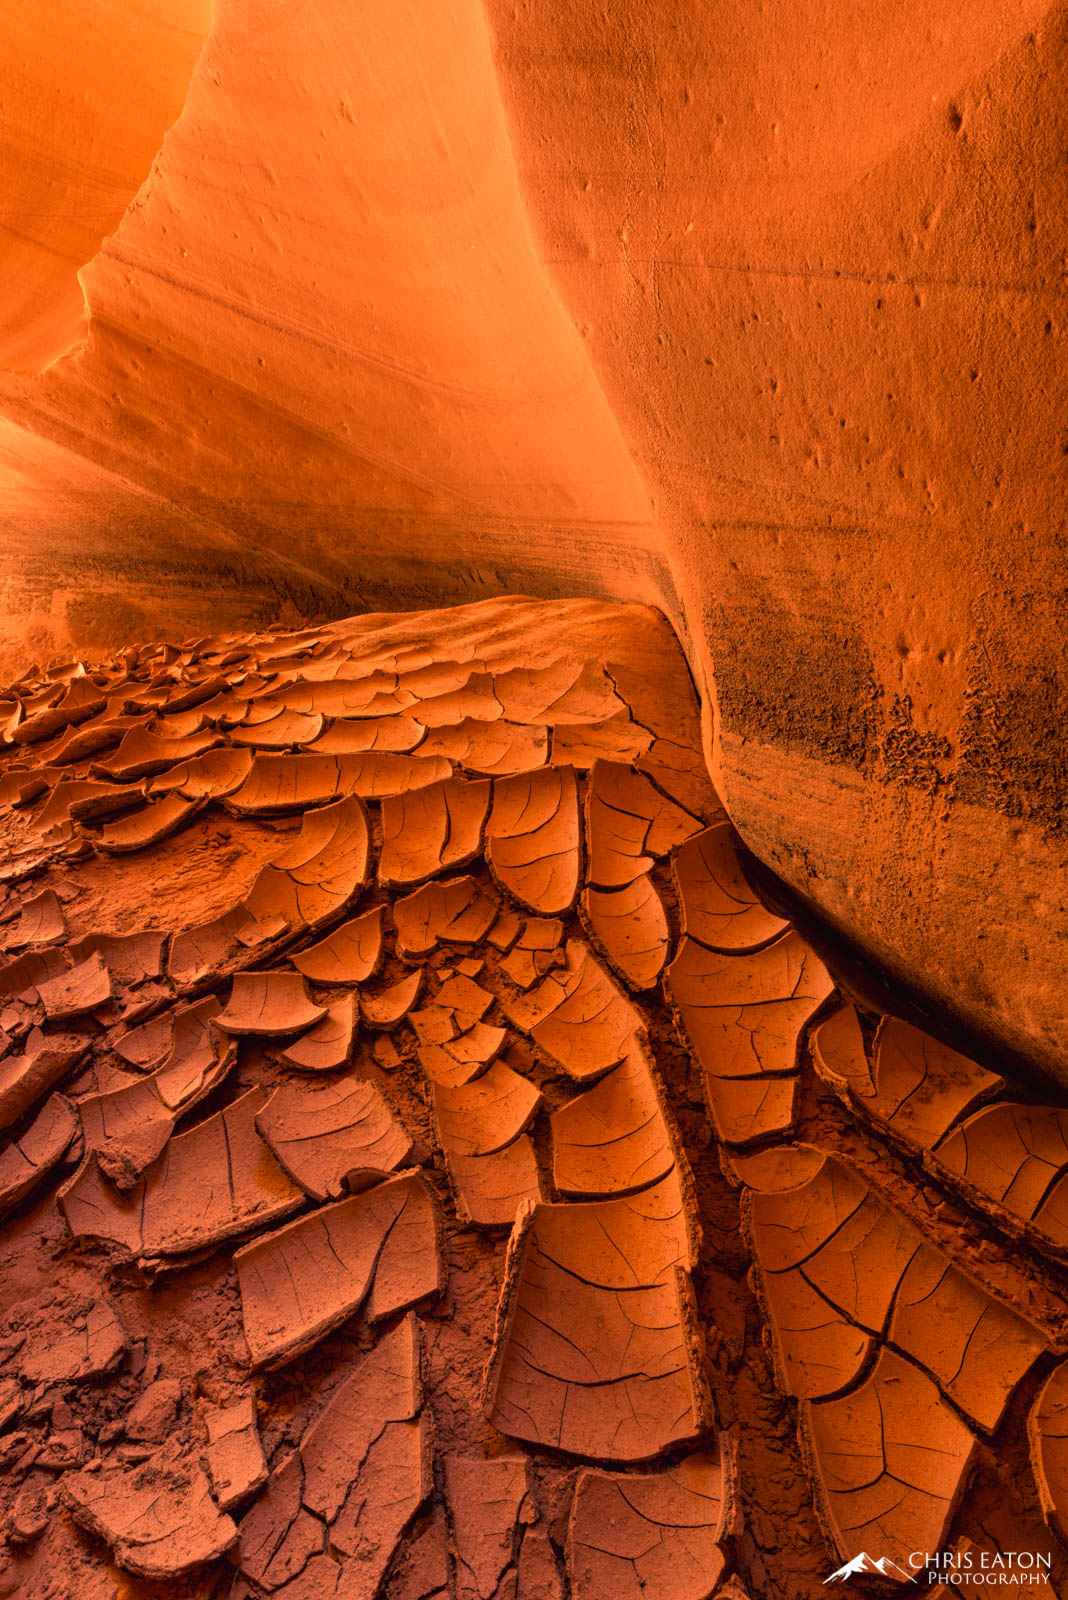 During the monsoon season, flash floods through the slot canyons of the Colorado Plateau can be a common occurrence. If the flood...